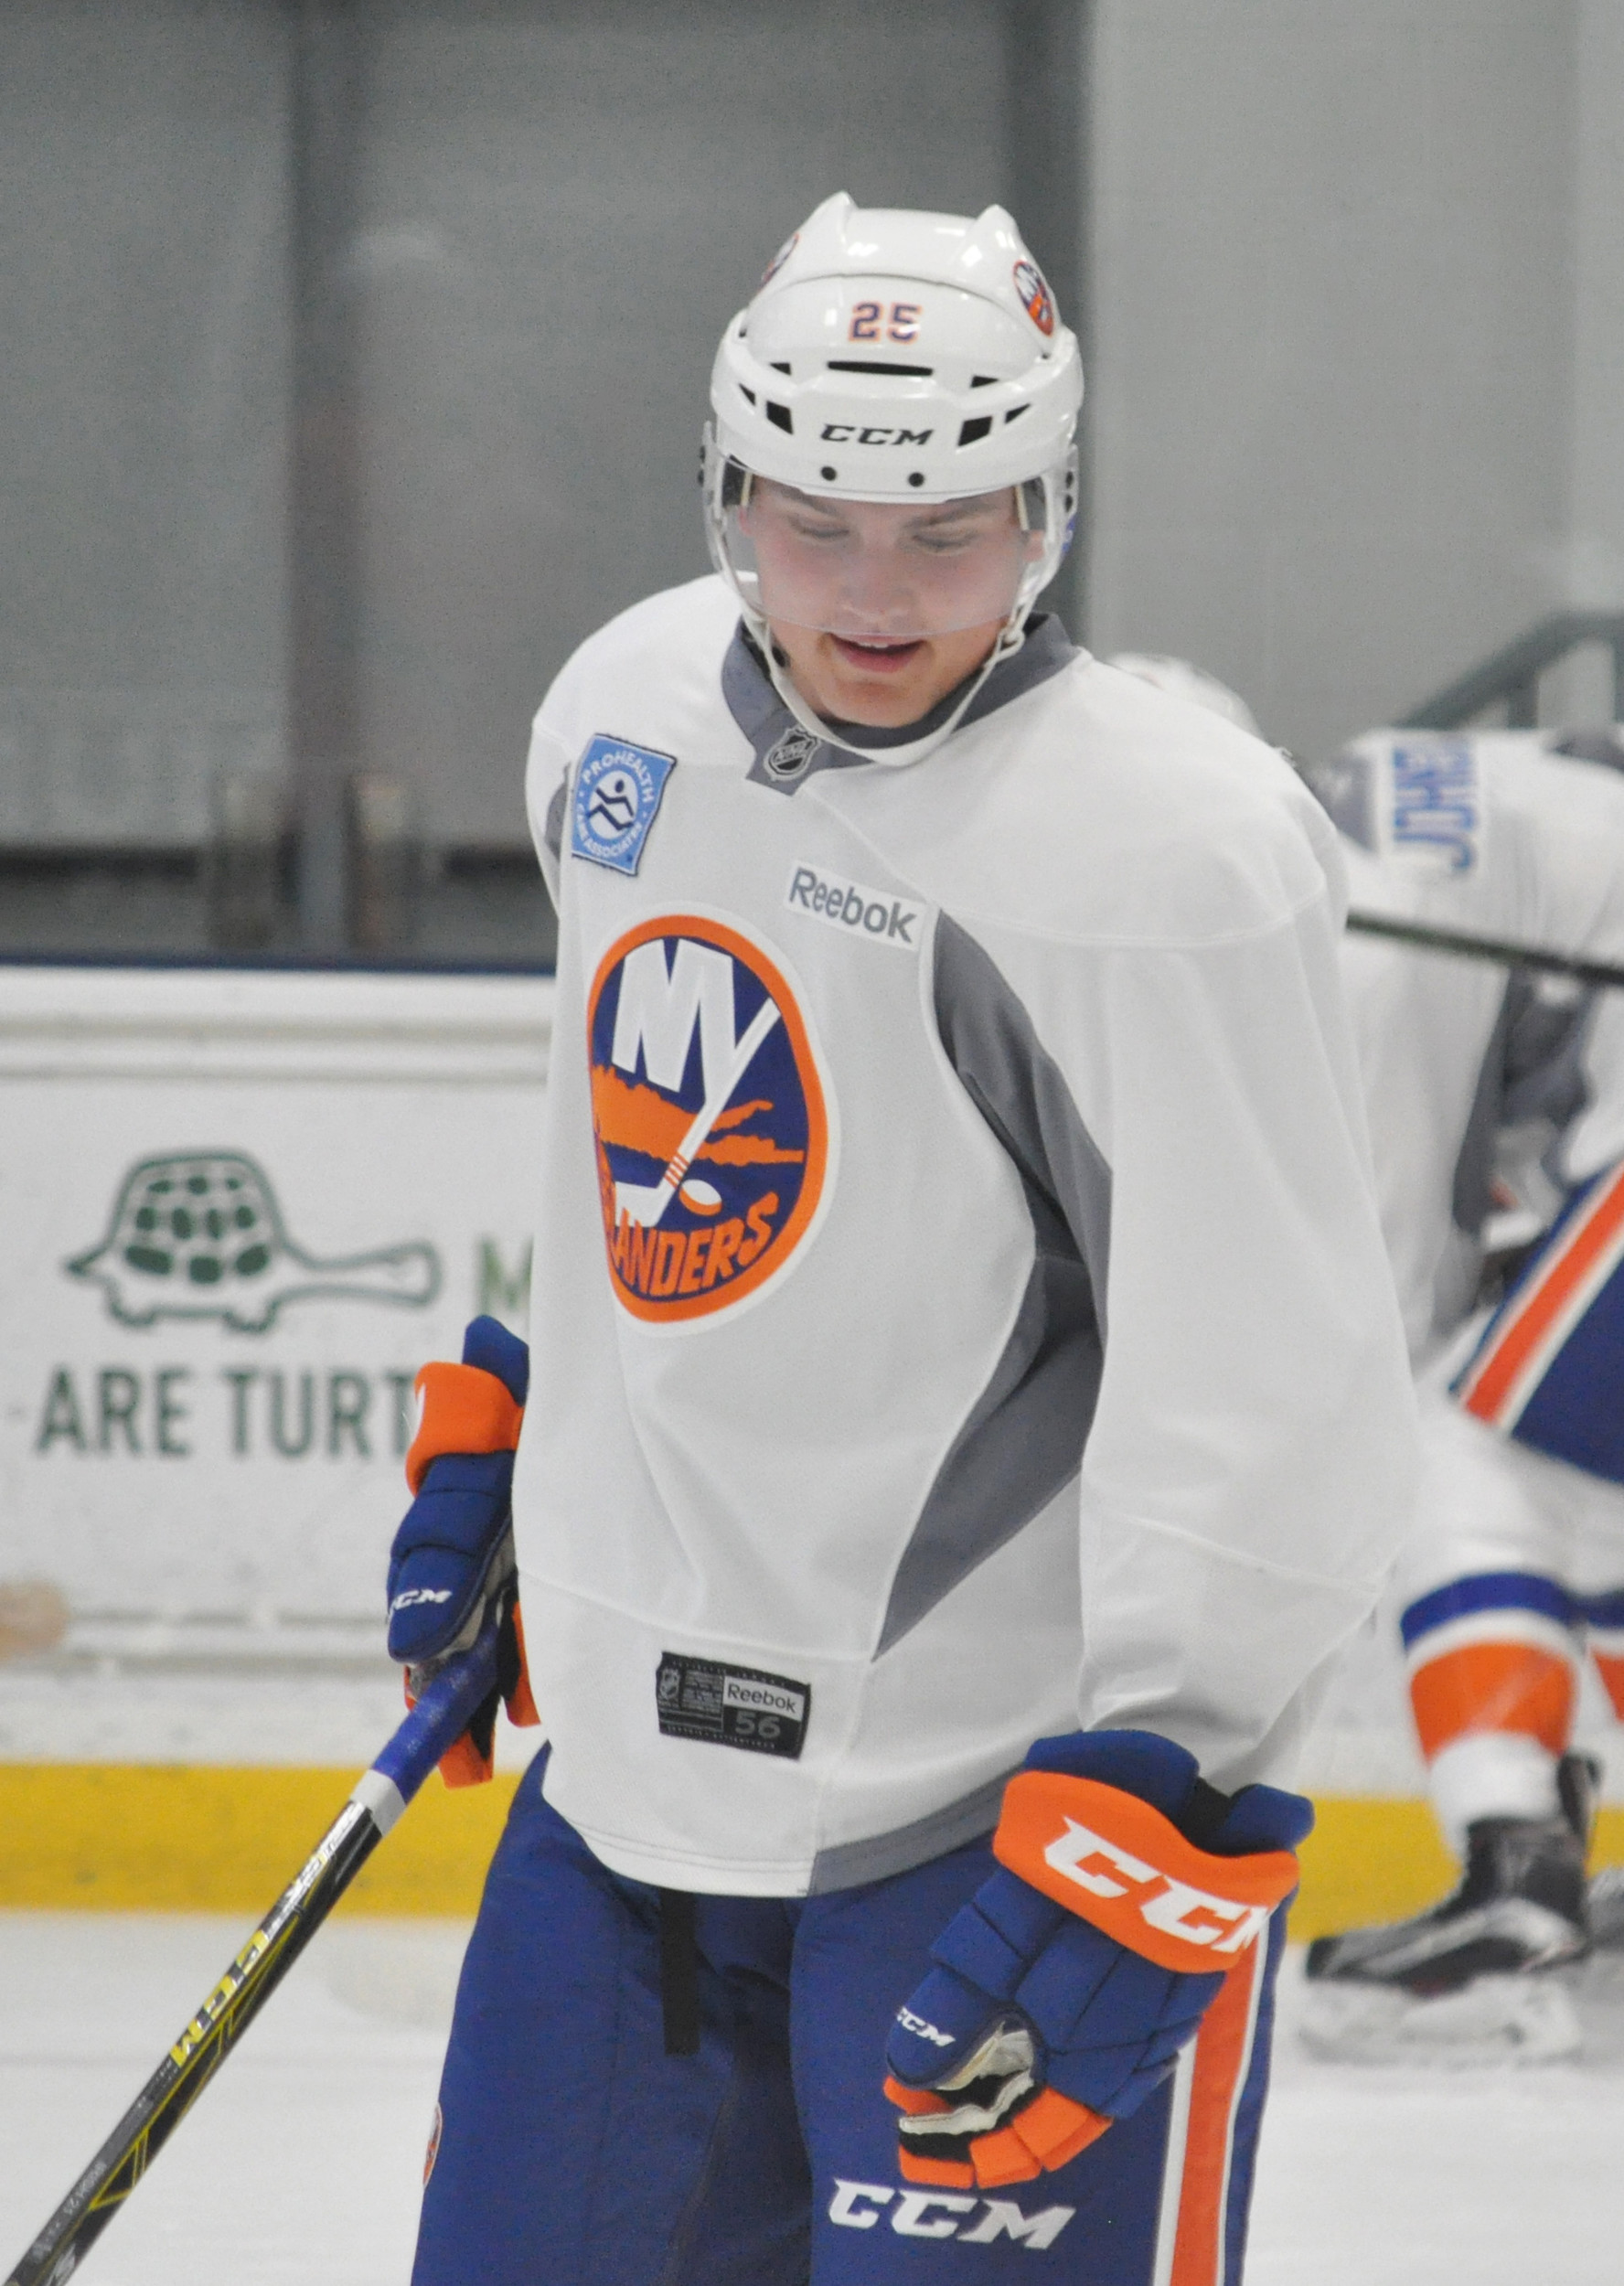 Isles first-round draft pick, Kieffer Bellows, taken No. 19 overall, is committed to Boston University next season.